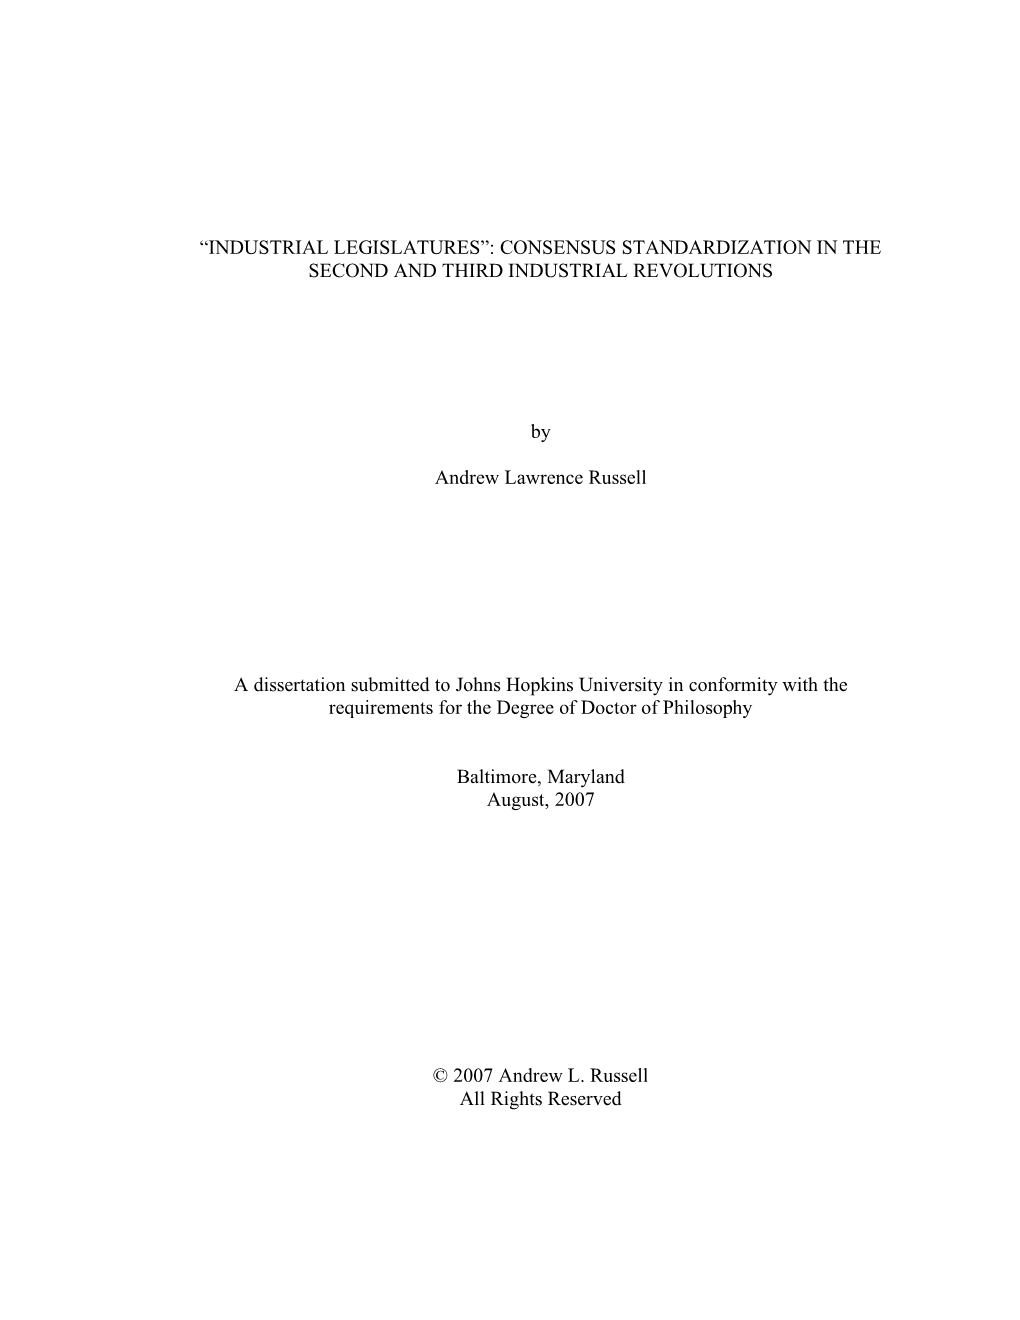 Industrial Legislatures”: Consensus Standardization in the Second and Third Industrial Revolutions